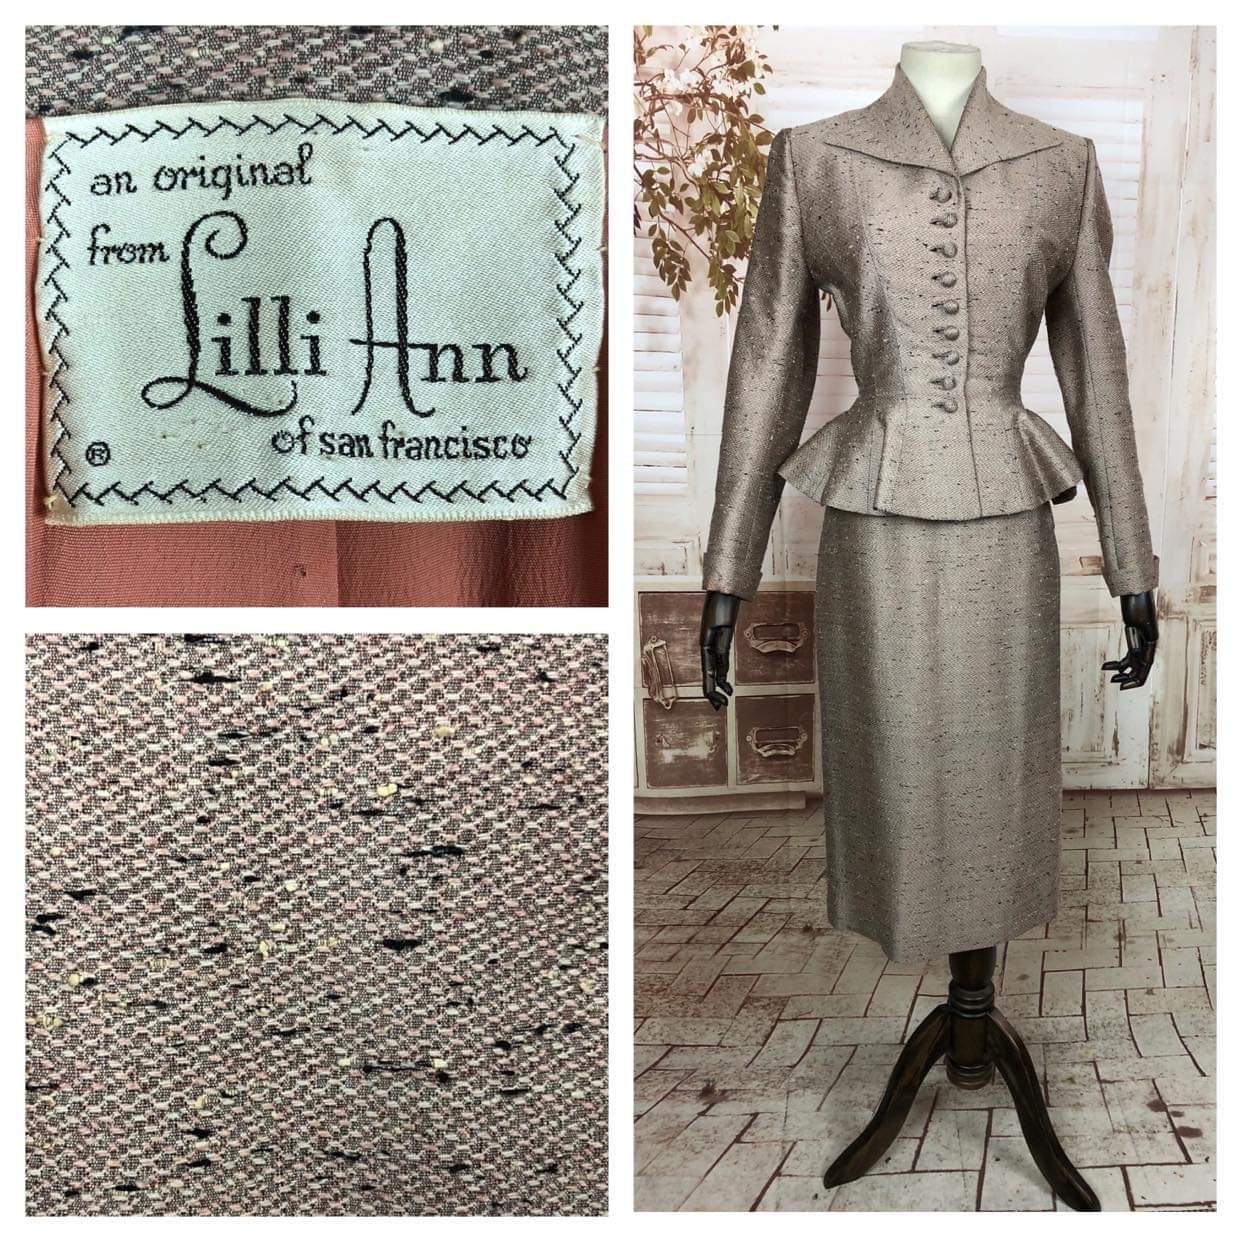 LAYAWAY PAYMENT 1 OF 3 - RESERVED FOR AISHA - PLEASE DO NOT PURCHASE - Iconic 1950s 50s Vintage Lilli Ann Silk Shot Worsted Wool Peplum Suit